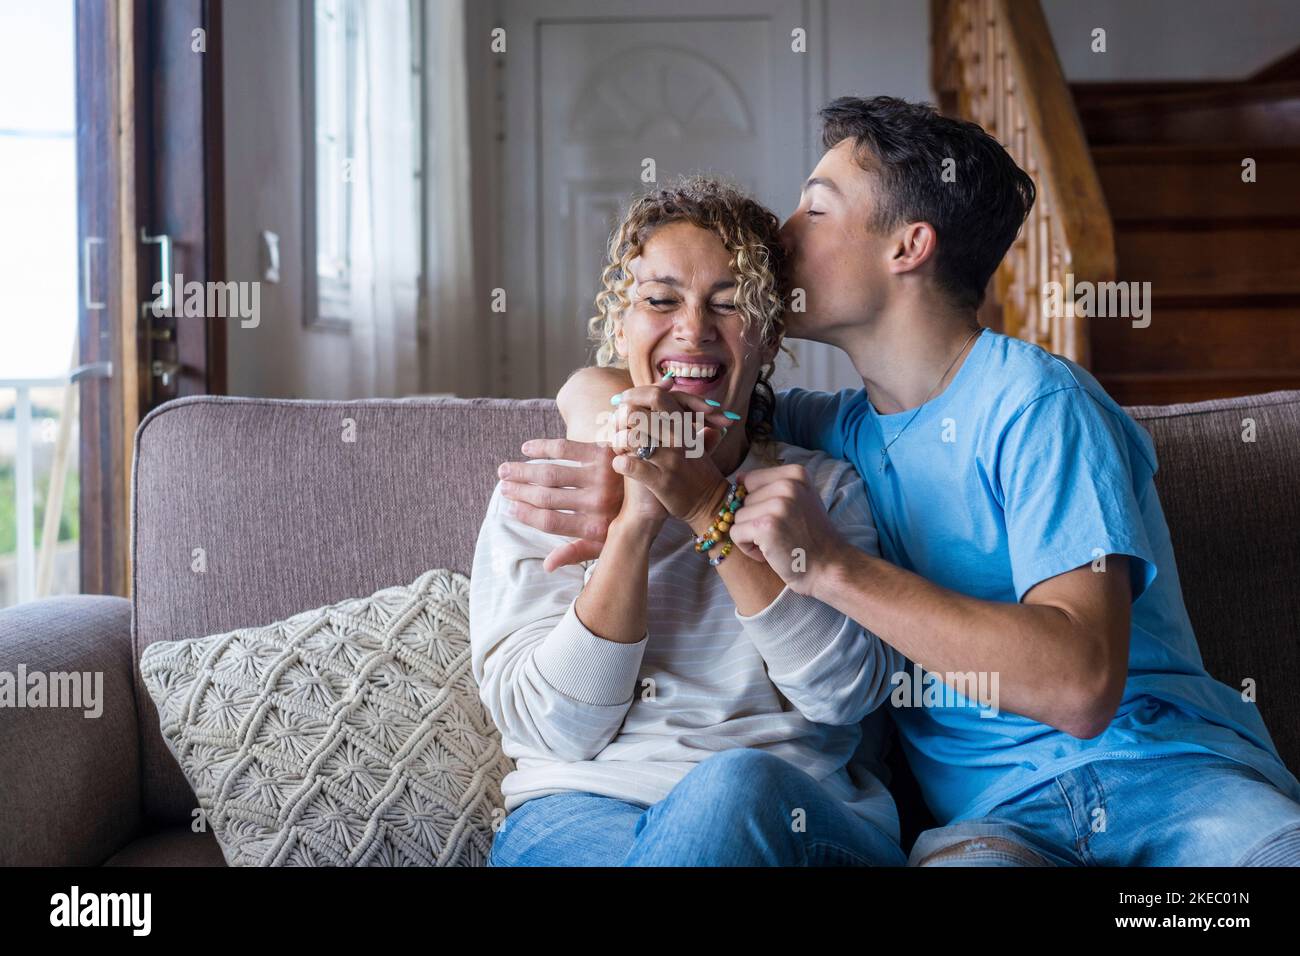 Portrait of grateful teenager man hug smiling middle-aged mother show love and care, thankful happy grown-up son in embrace cheerful mom, enjoy weekend family time at home together, bonding concept Stock Photo